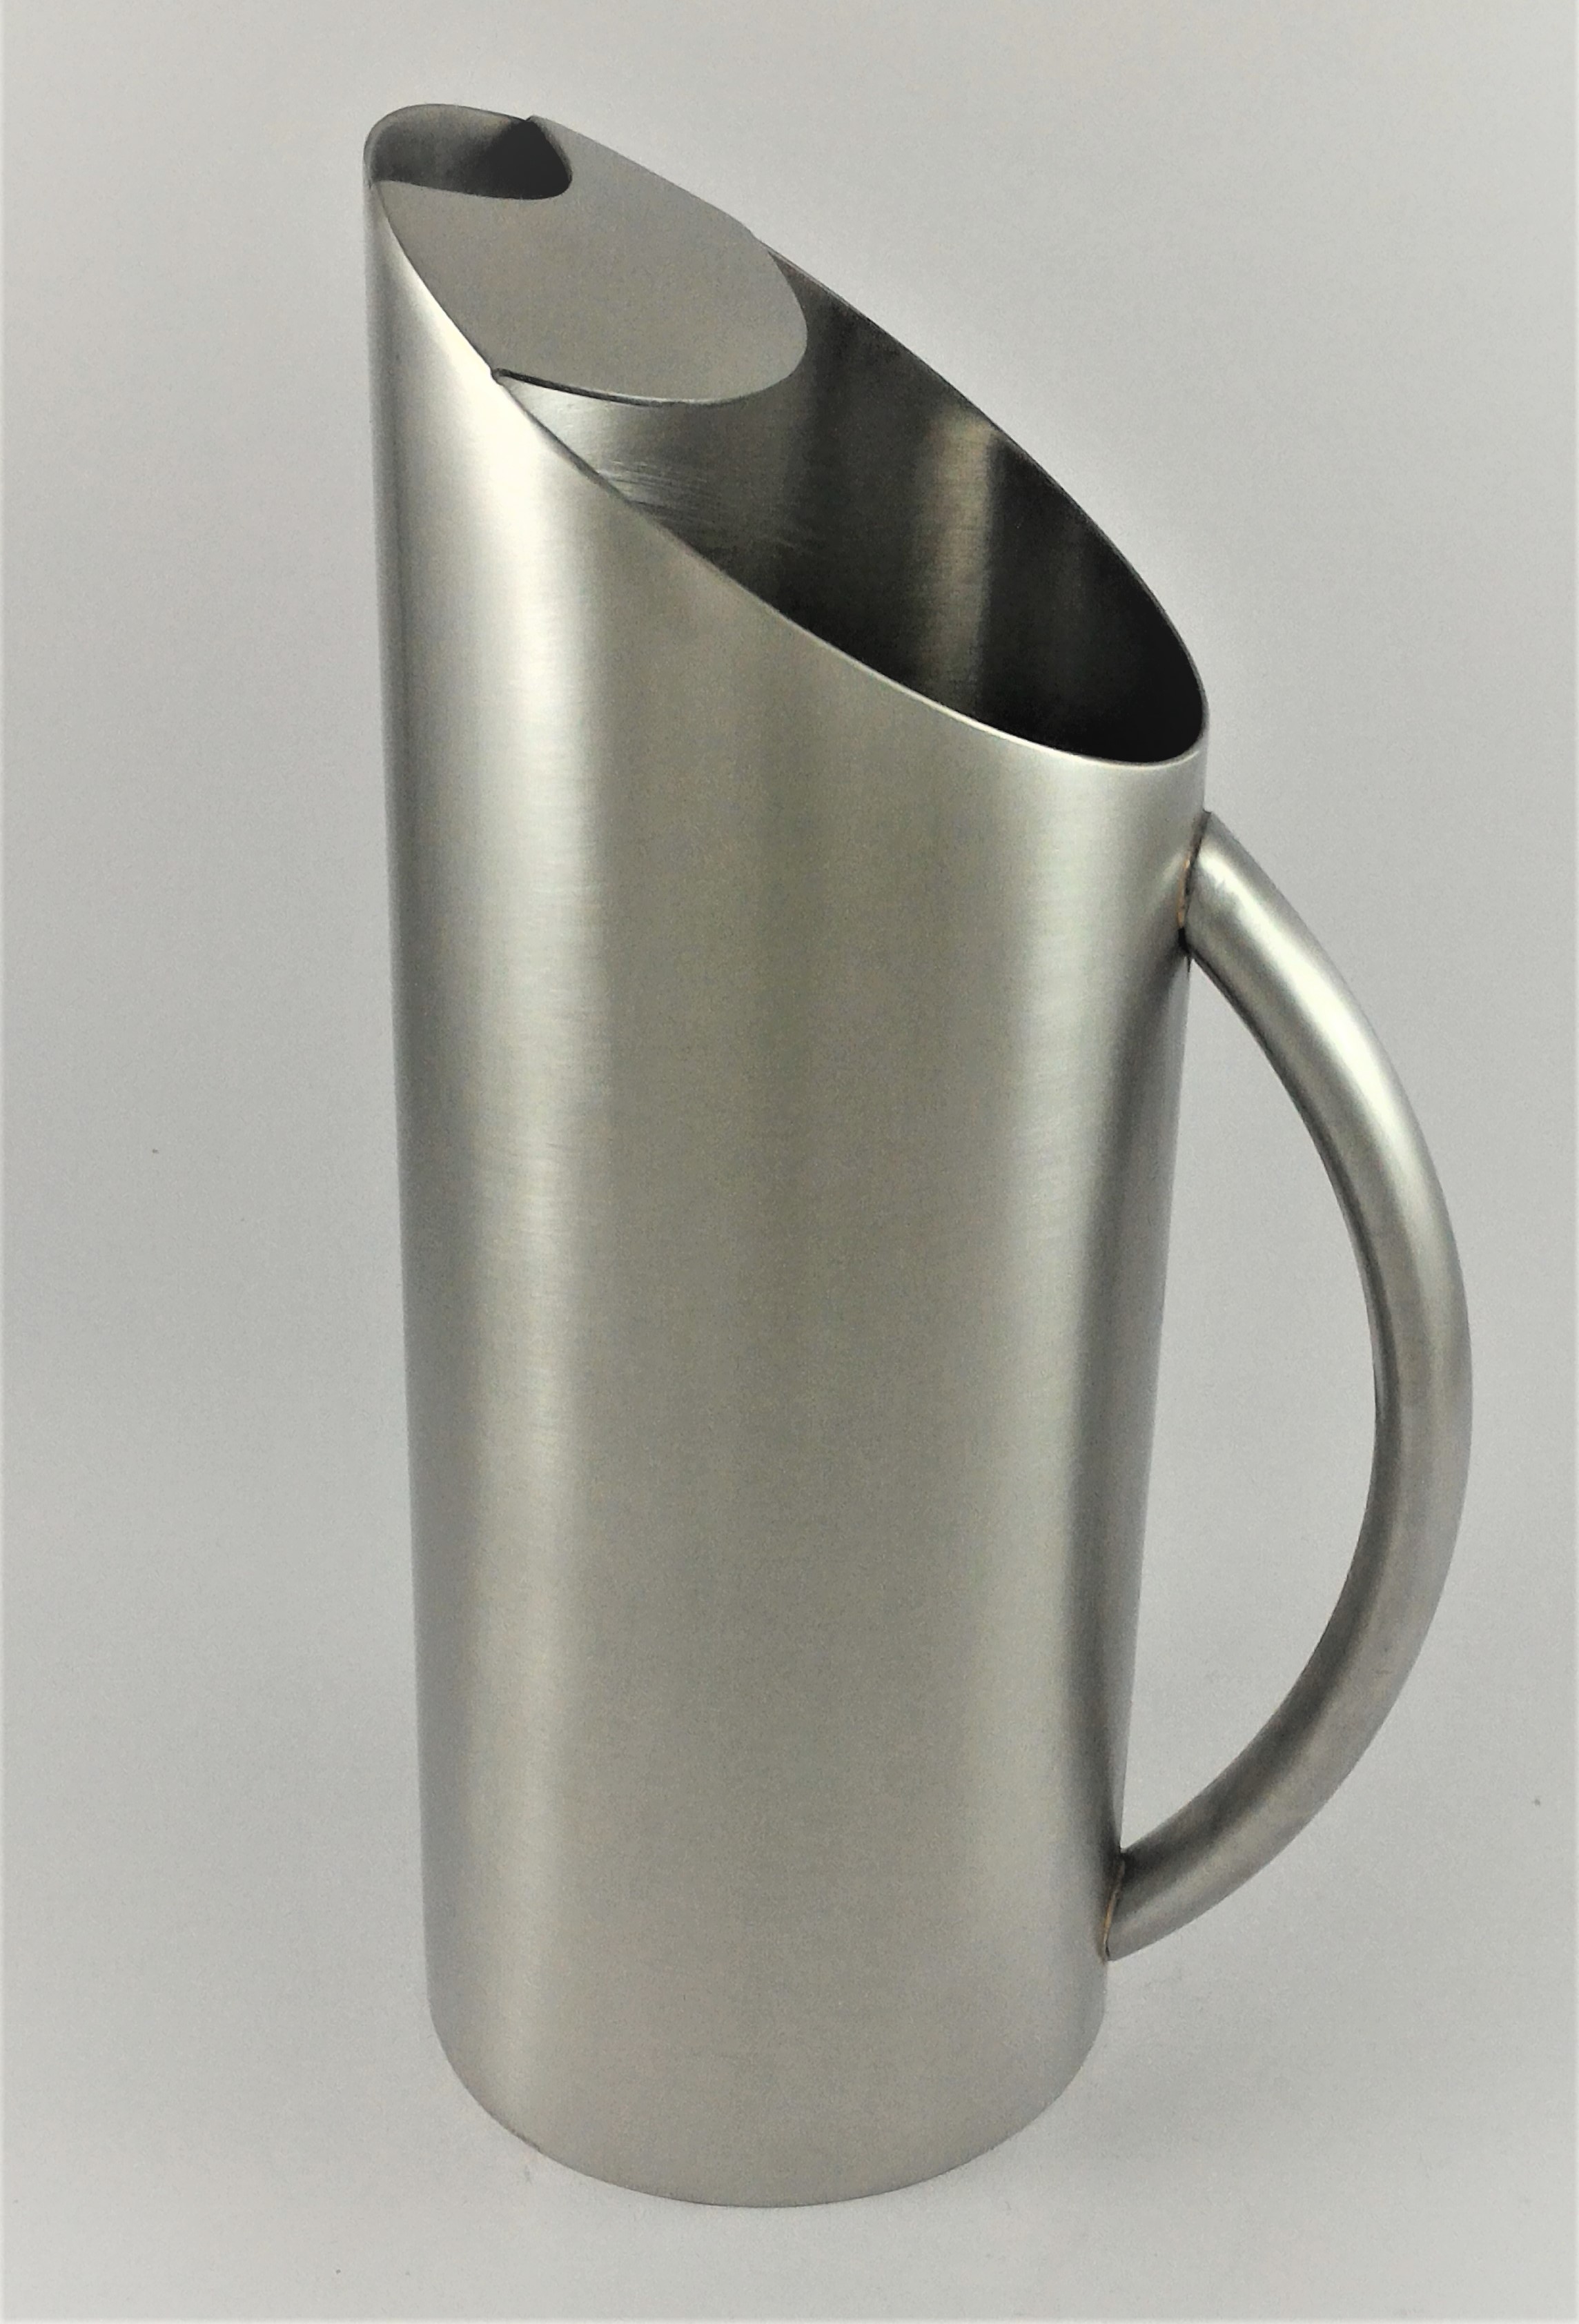 Stainless steel Pitcher